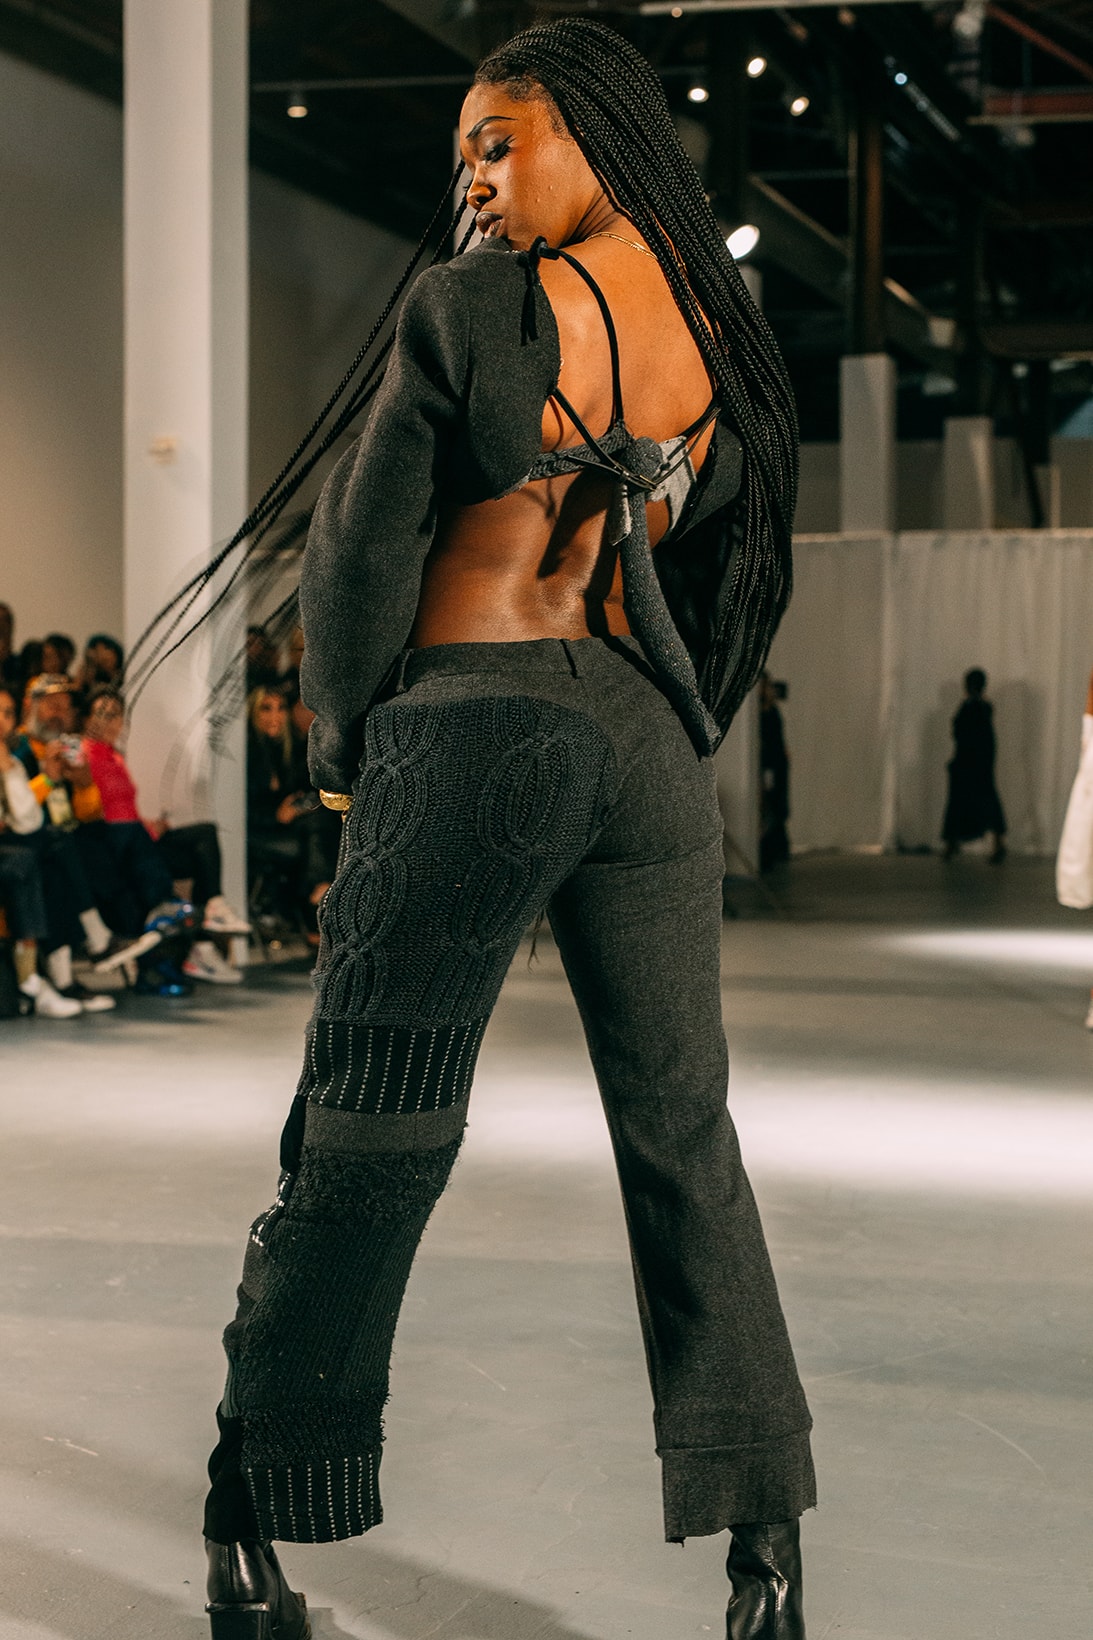 no sesso pierre davis arin hayes autumn randolph fall winter collection los angeles runway show pants sweater